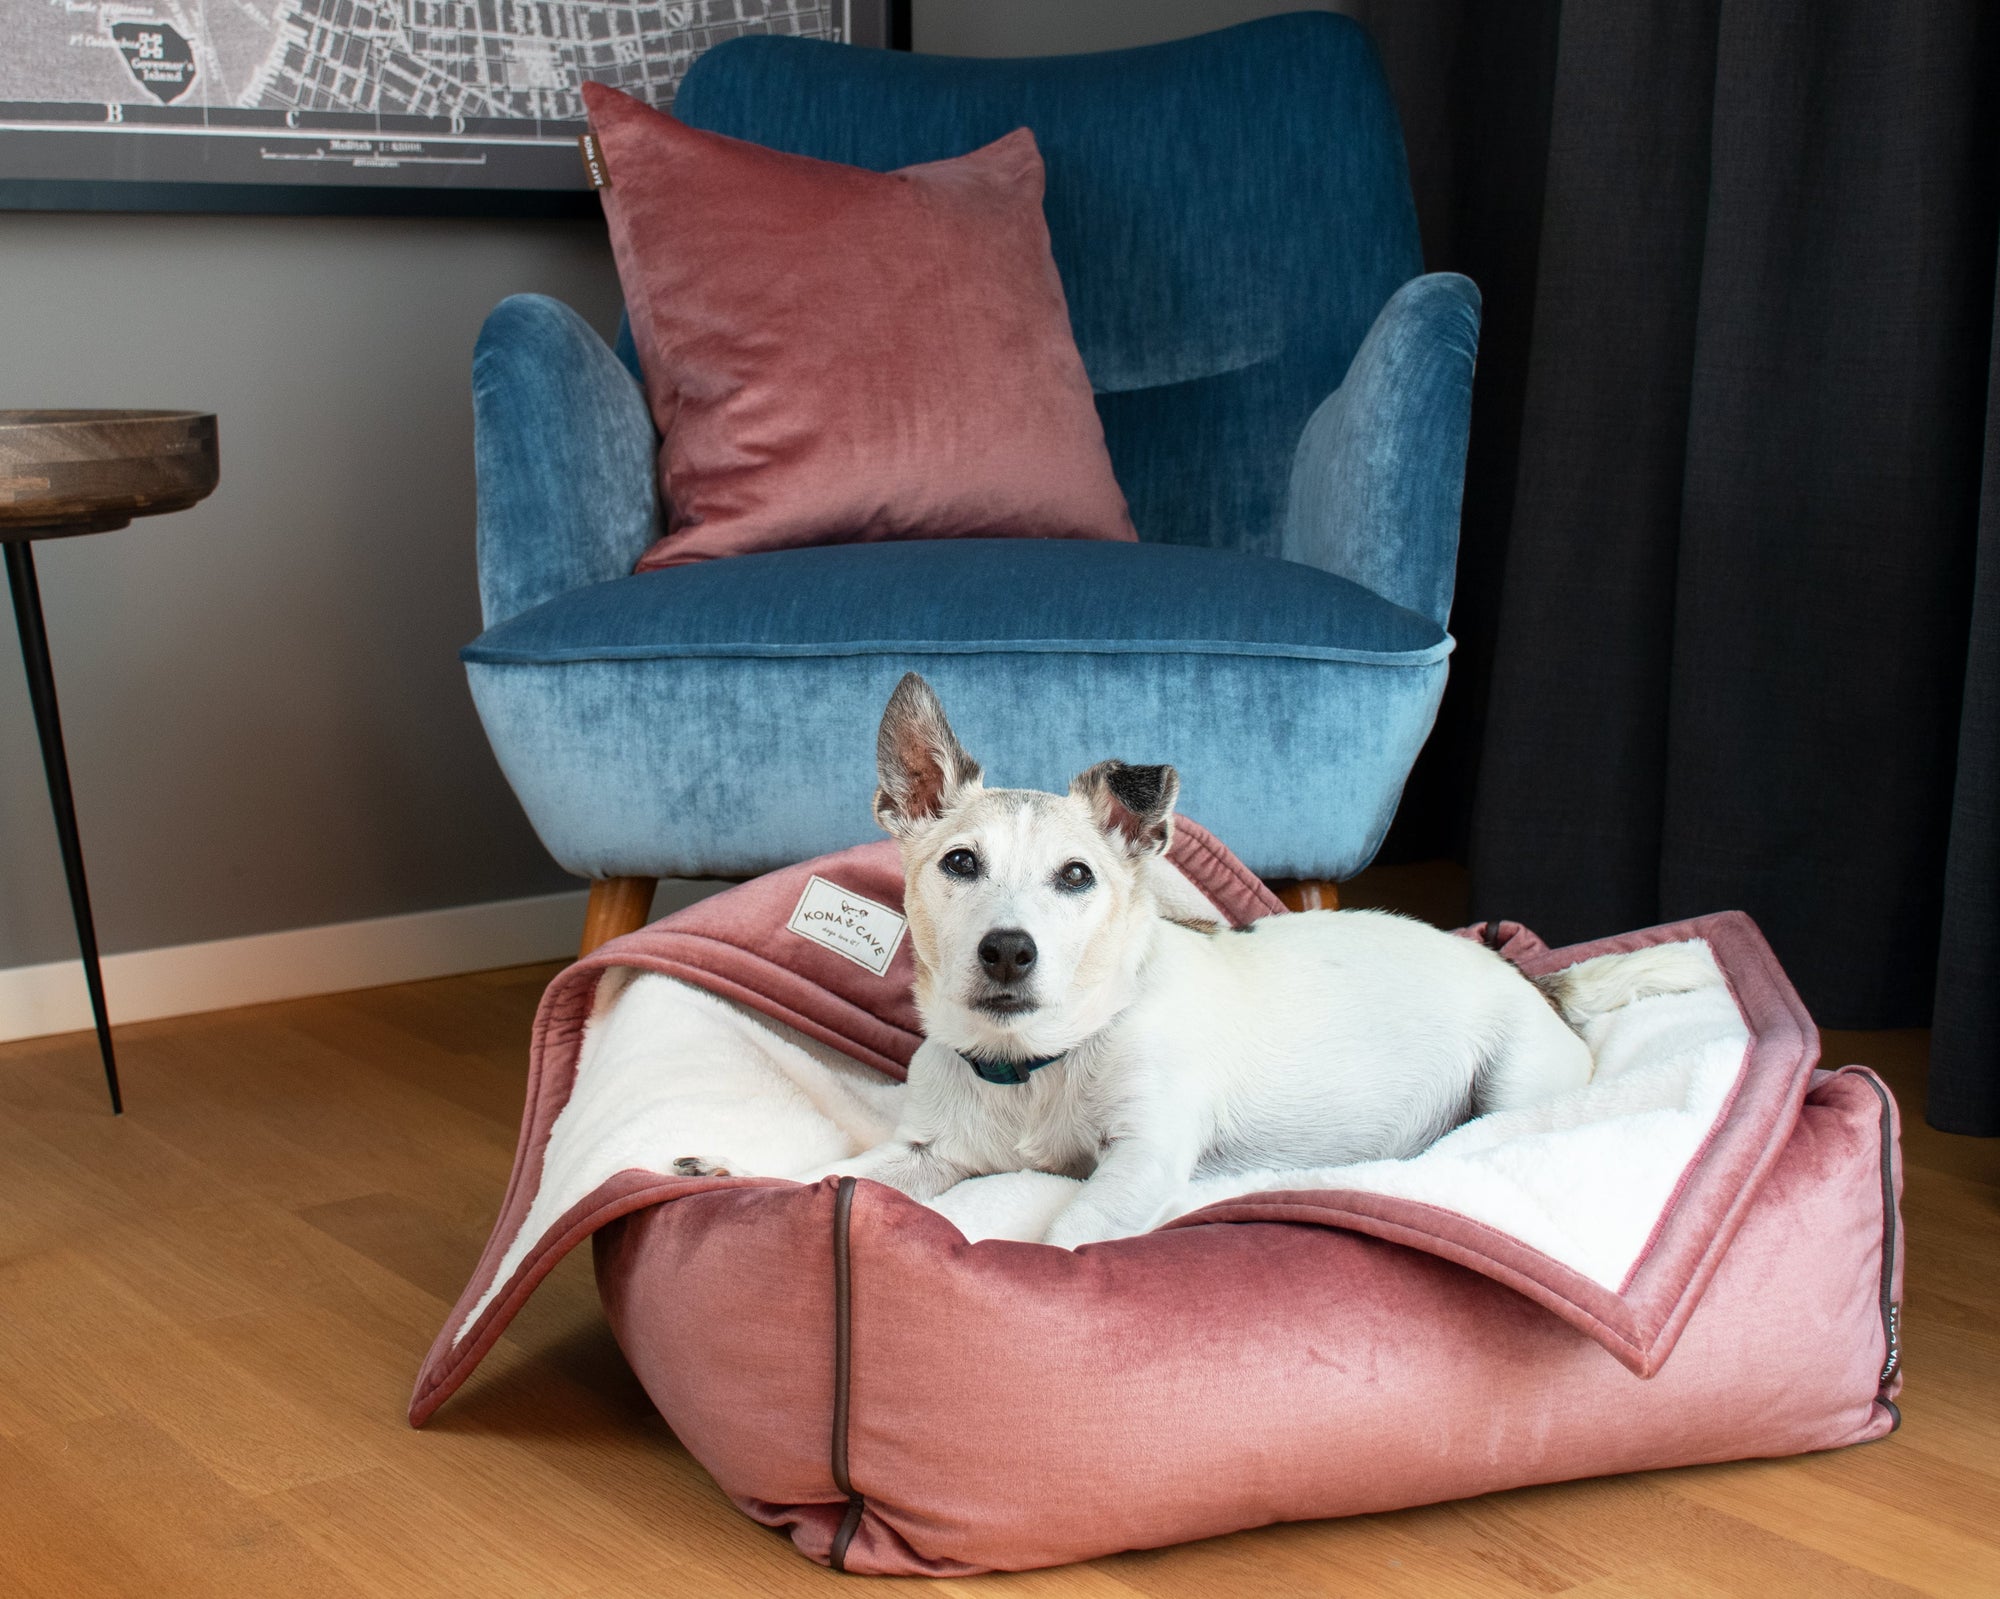 Luxury brand KONA CAVE® - Doggy Decor Set includes 2 decorative velvet Pillow covers and matching luxury lined velvet blanket. Available in 3 sizes.  Pale Pink velvet.  Matches pink velvet pet bed. Heavy, soft and comforting thick blanket. 